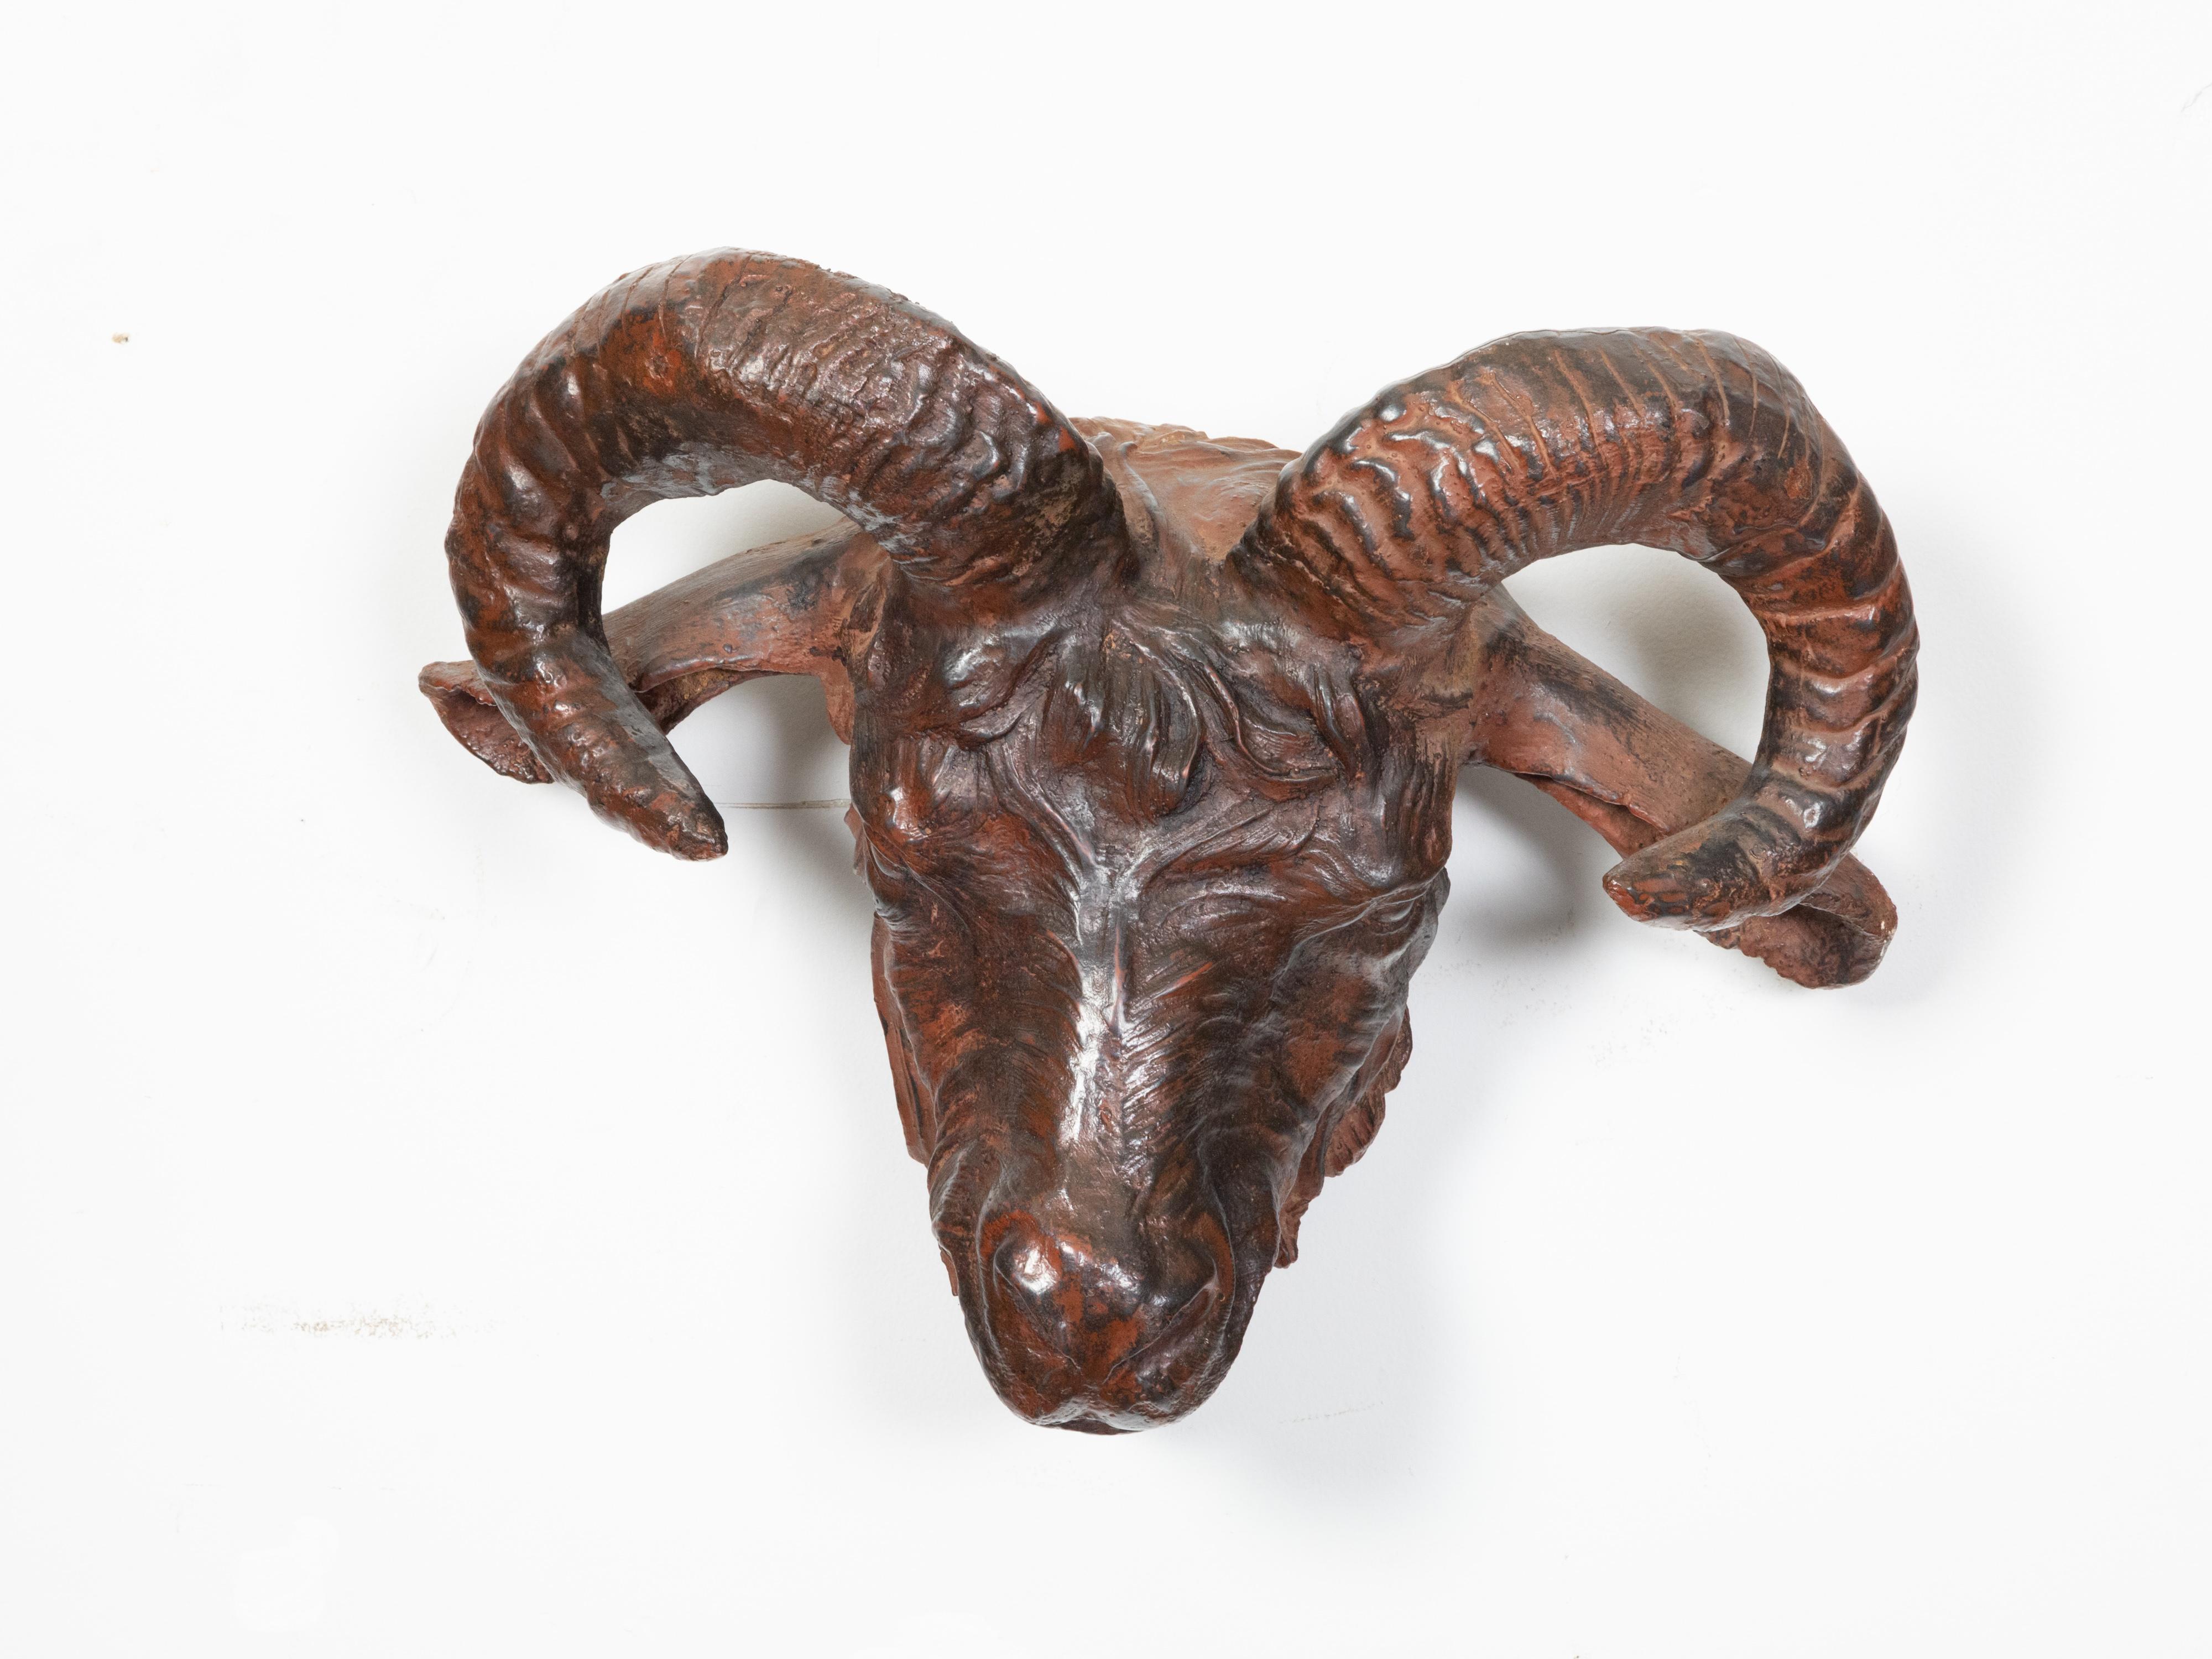 An Italian wall hanging patinated iron ram's head sculpture from the 19th century, with rusty finish and great finesse in the details. Created in Italy during the 19th century, this iron ram's head is a showstopper! Showcasing a nice rusty patina,